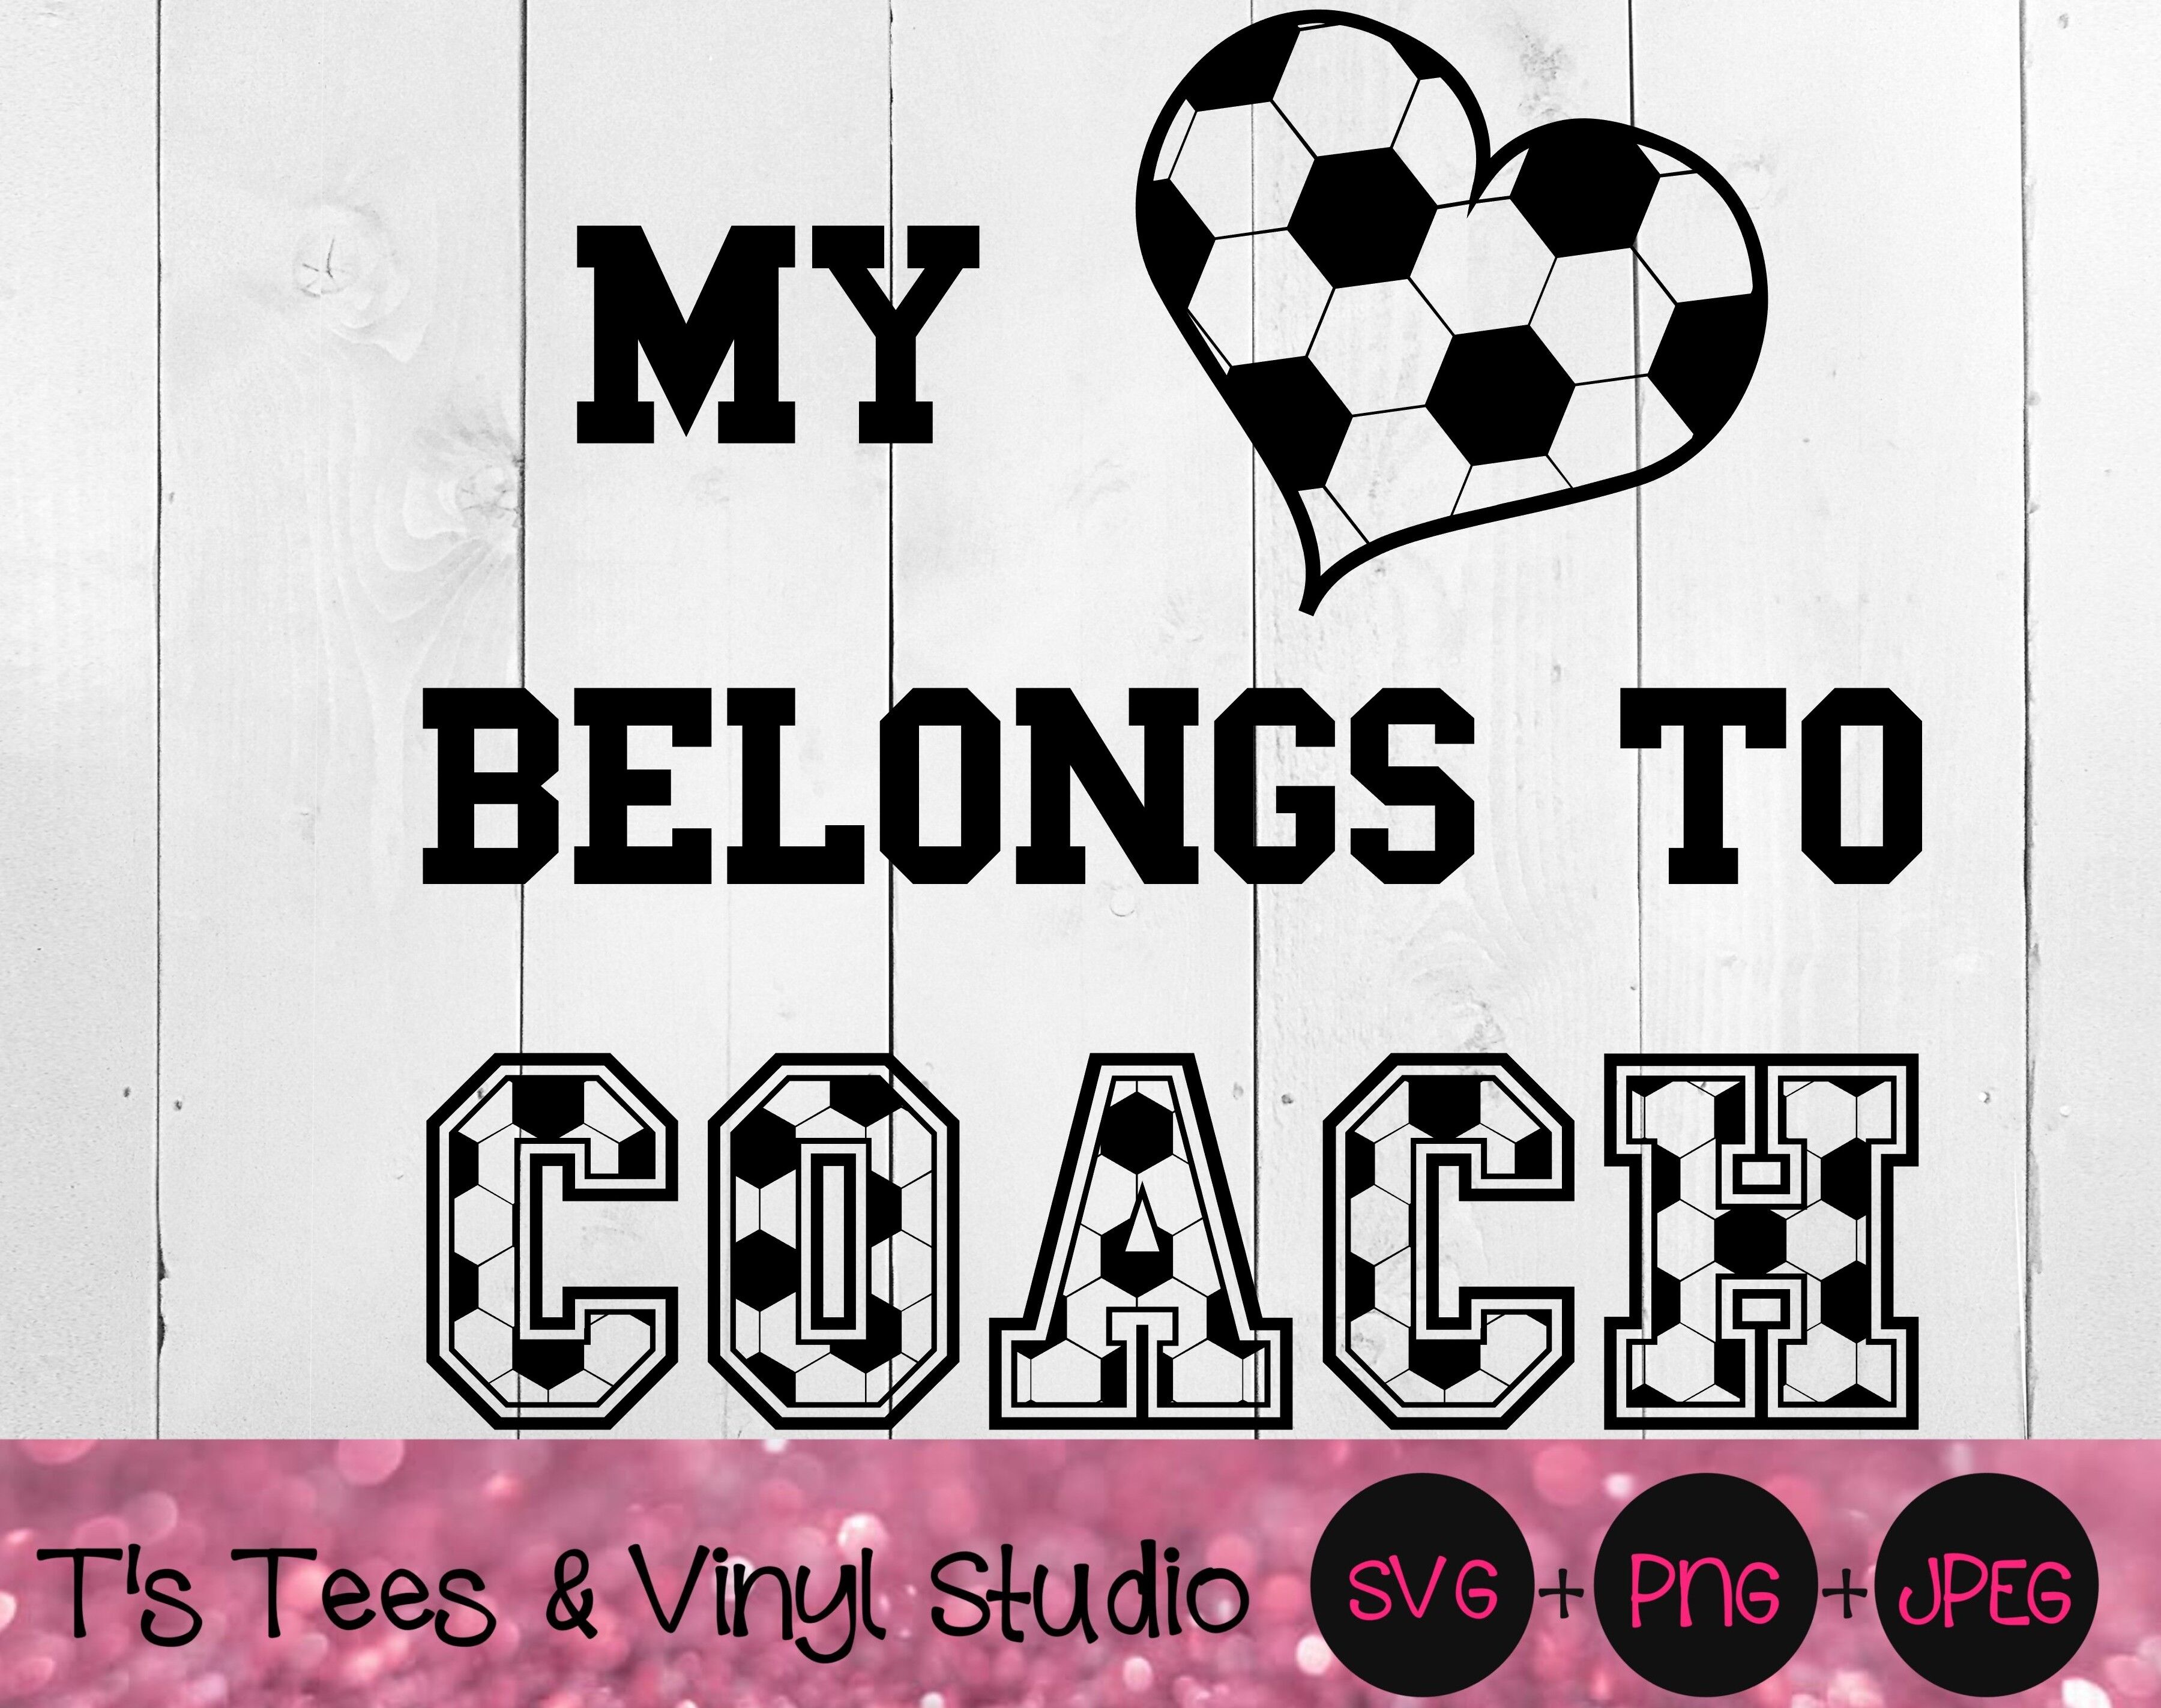 Soccer Svg Coach Svg Heart Svg Soccer Png Coach Png Love Soccer S By T S Tees Vinyl Studio Thehungryjpeg Com